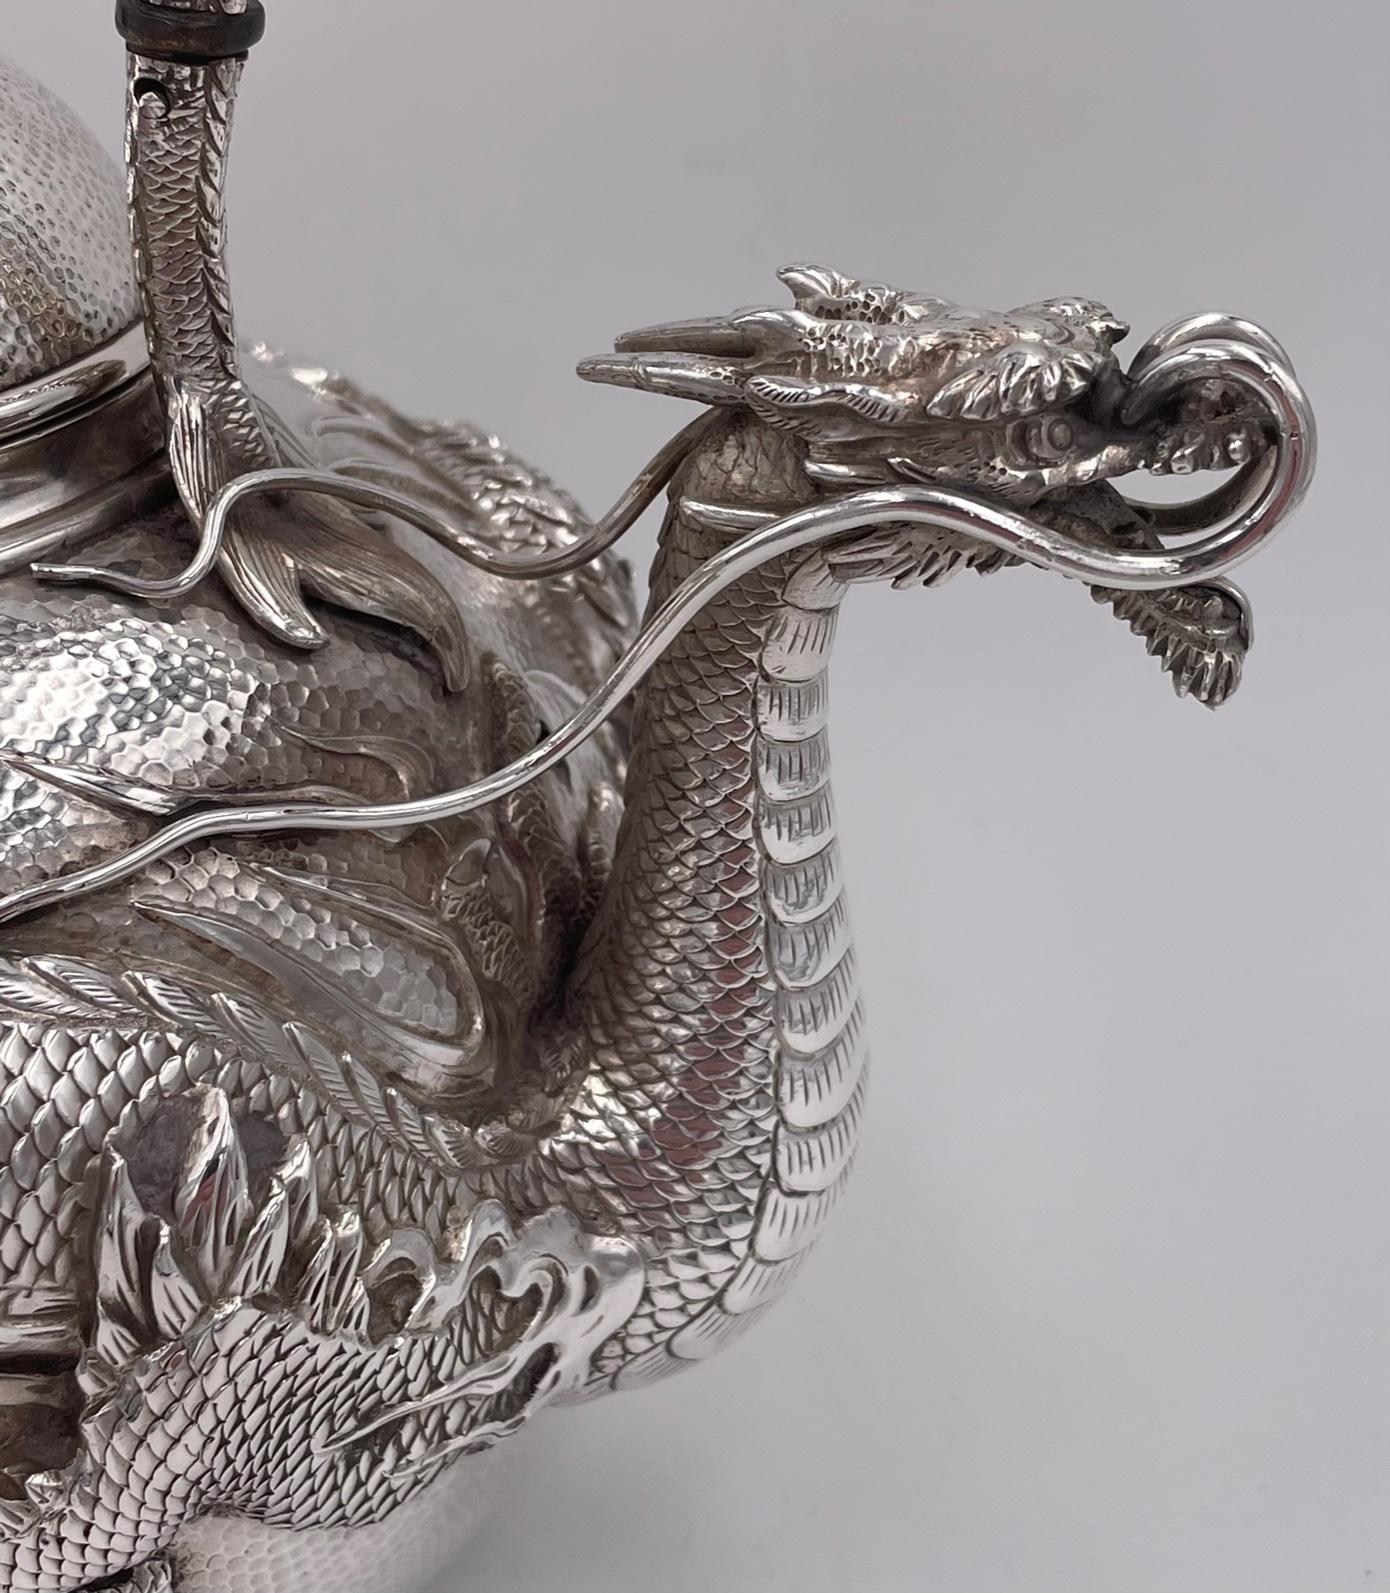 A Japanese silver tea kettle with dragon spout and embossed dragon around the body. The handle is formed of two entwined dragons.